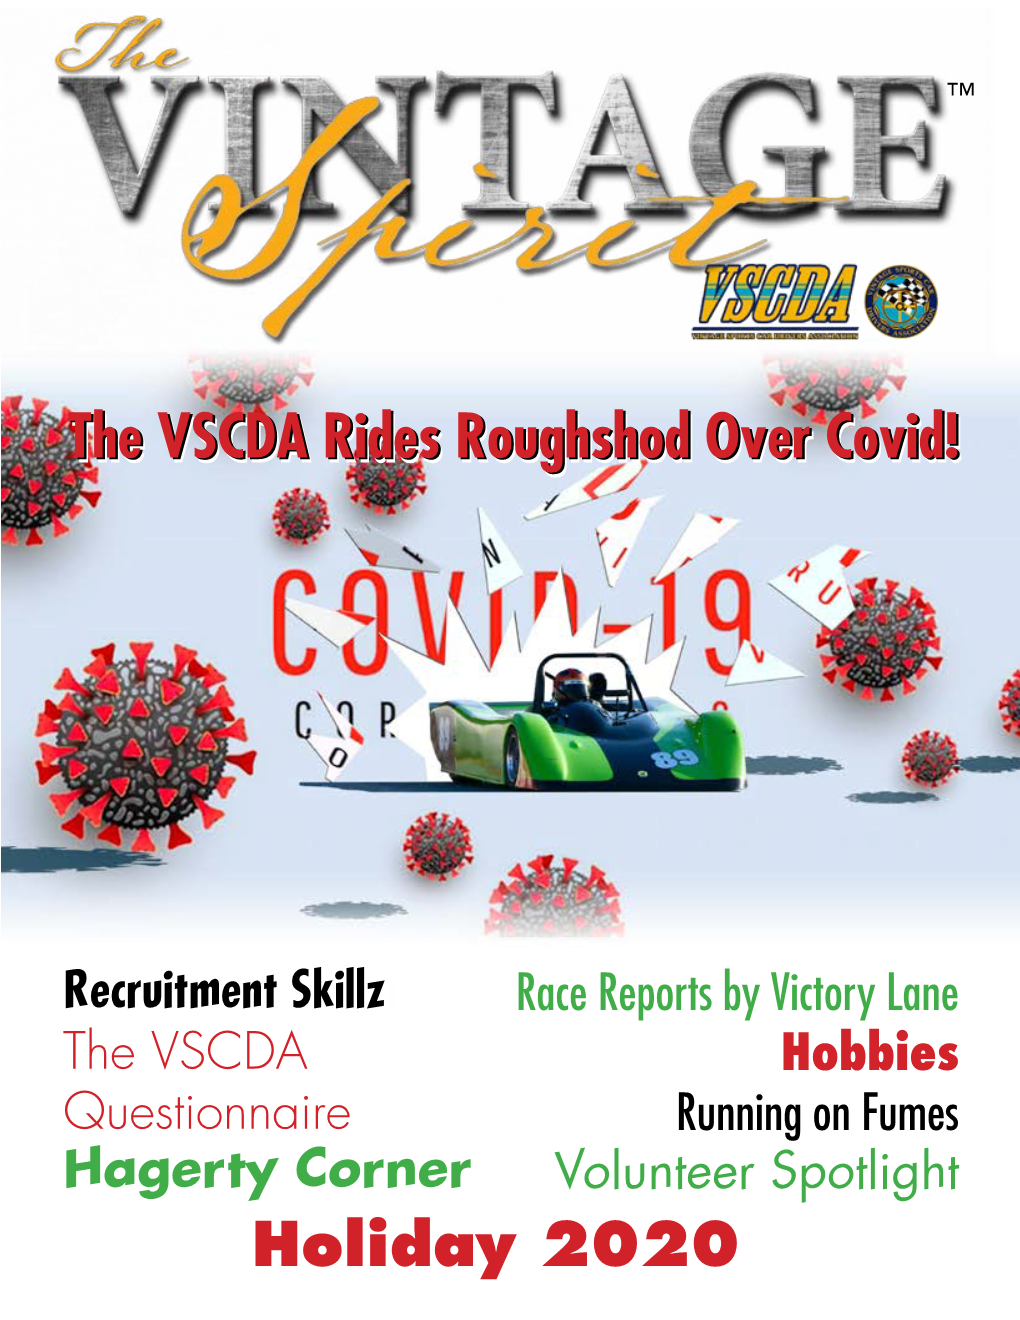 The VSCDA Rides Roughshod Over Covid! Holiday 2020